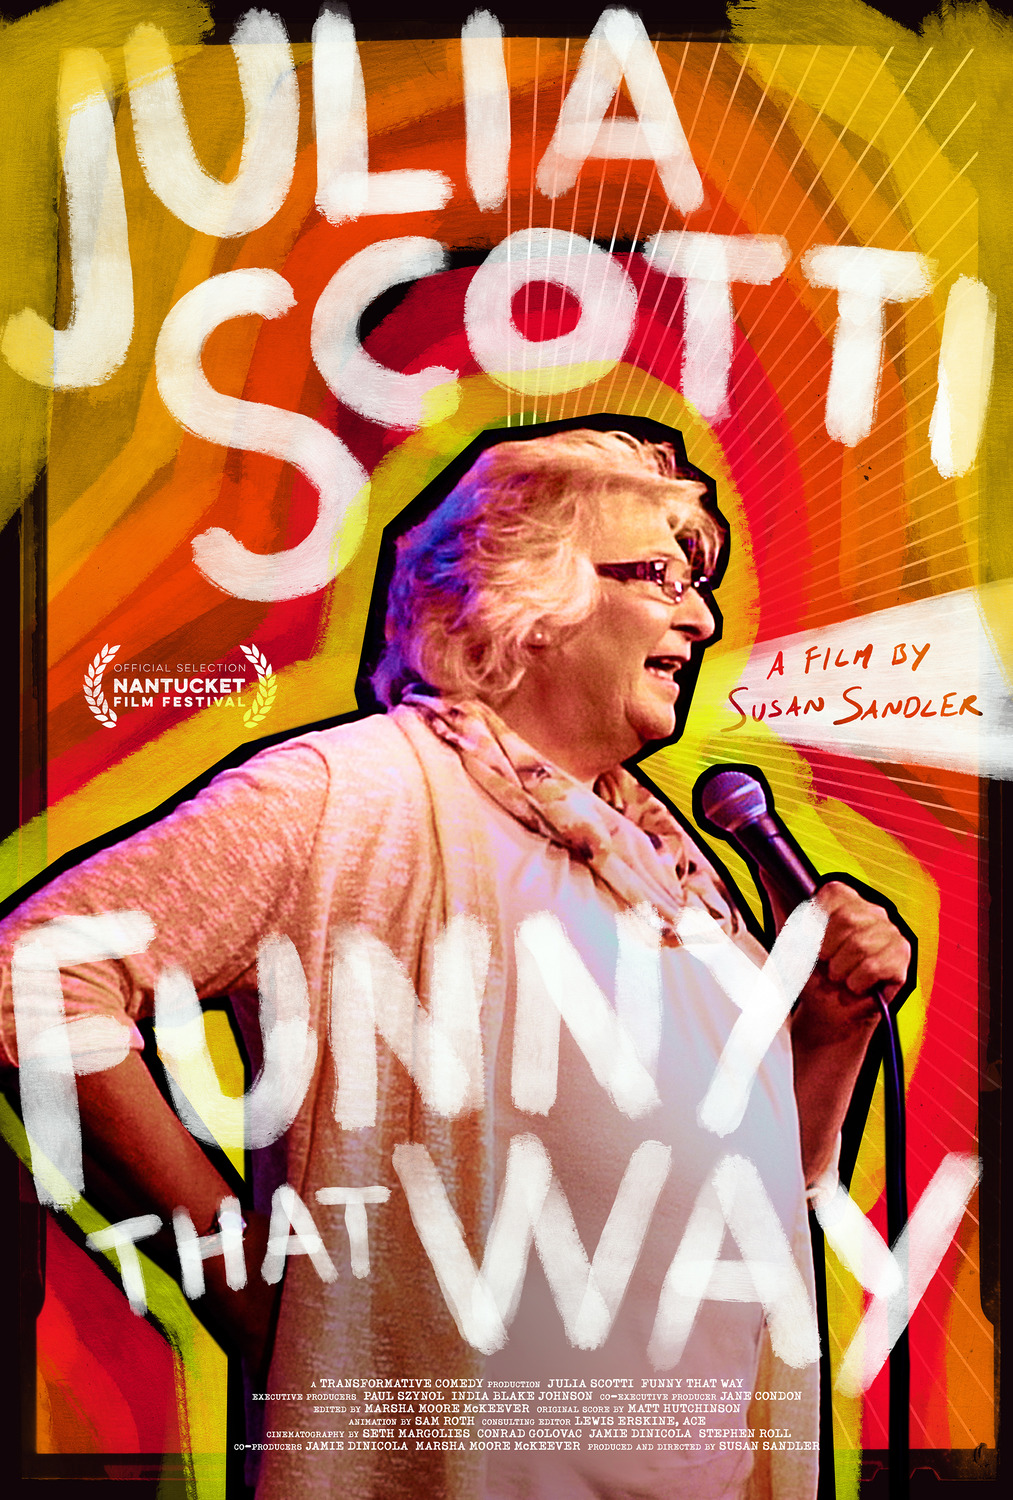 Extra Large Movie Poster Image for Julia Scotti: Funny That Way 